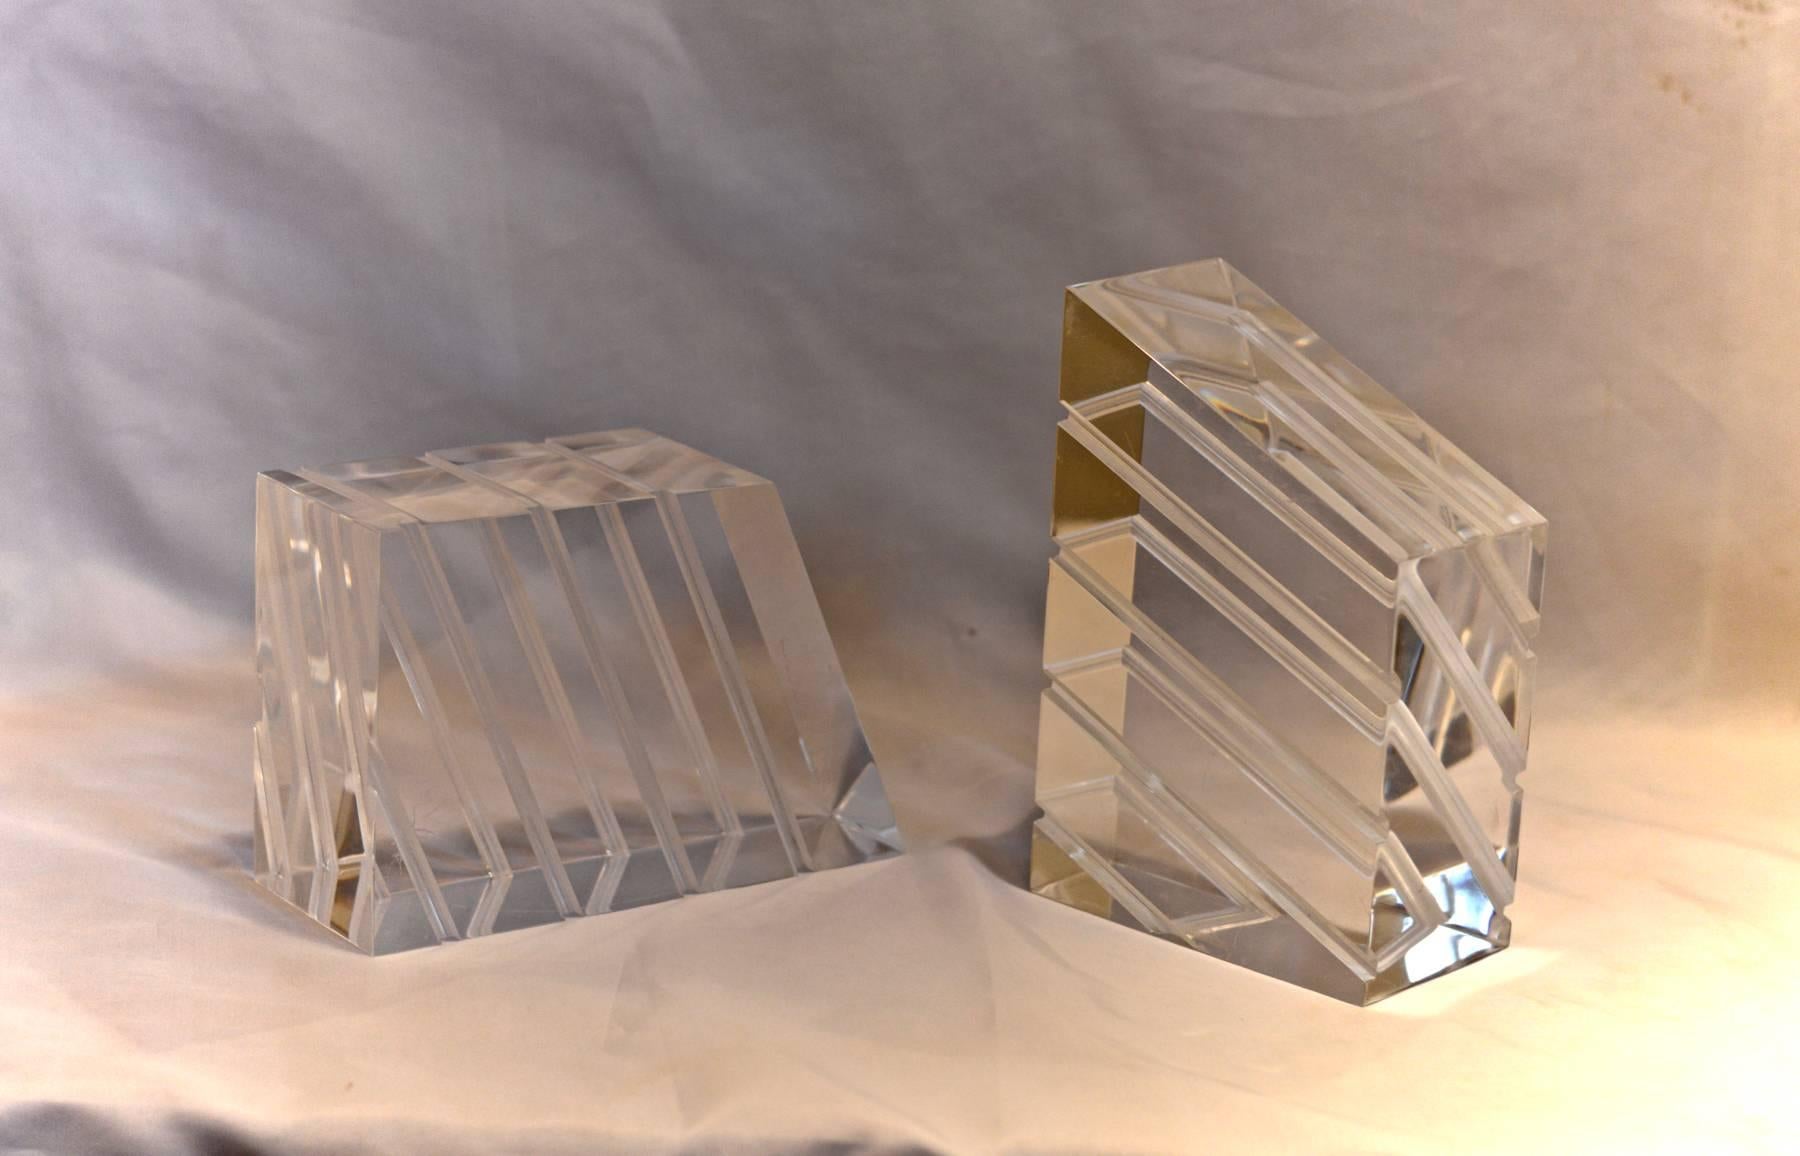 An eye-catching pair of Lucite bookends of trapezoidal shape.